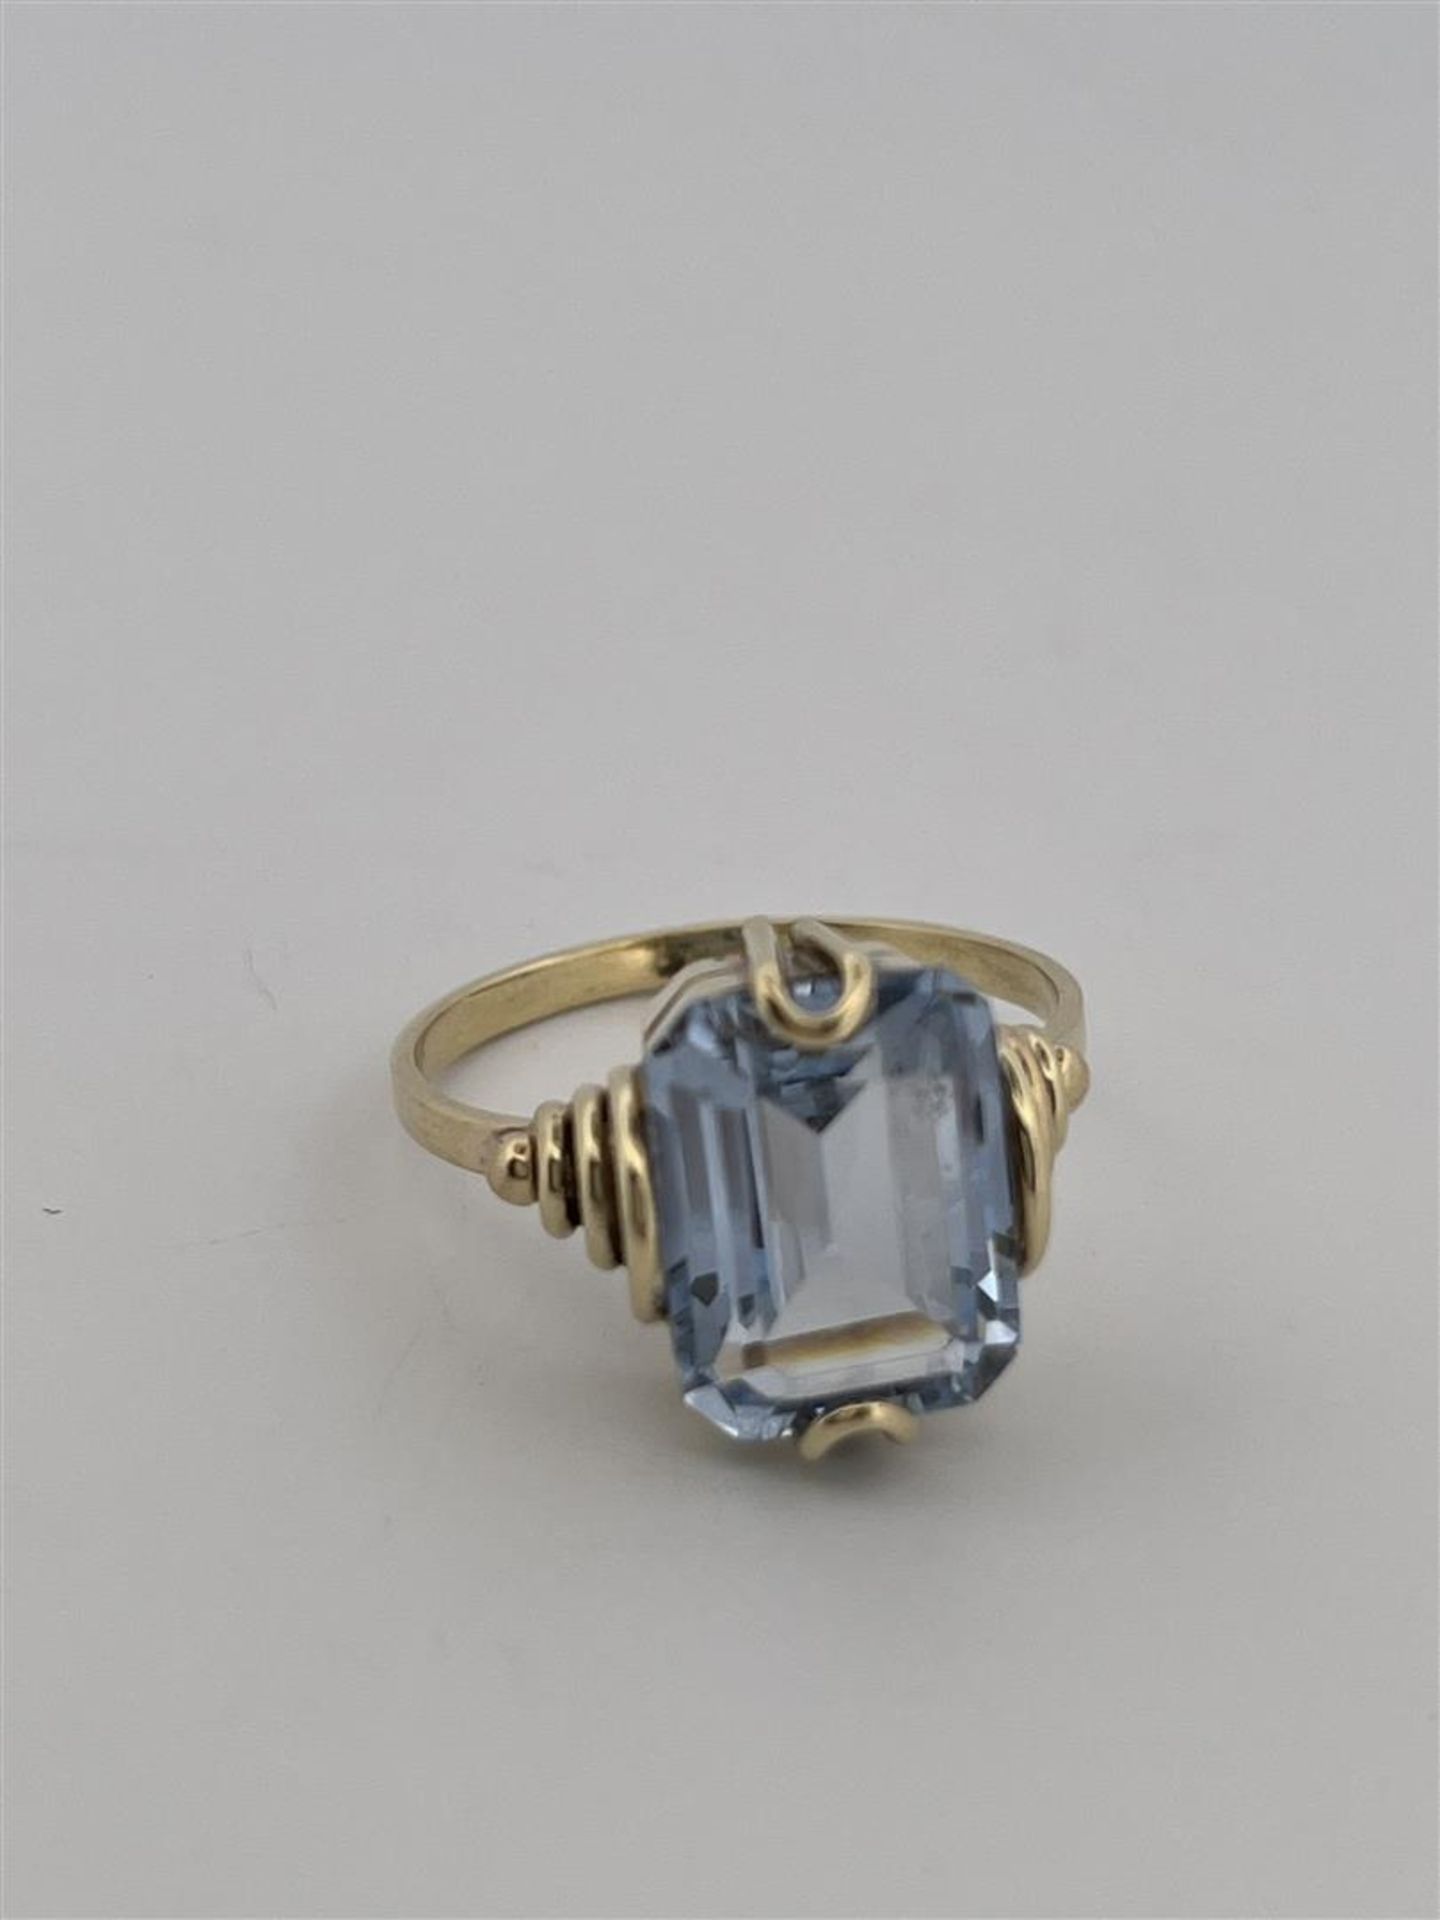 14kt yellow gold ring set with aquamarine.
The aquamarine isemerald cut measures approx. 11.8 x 8.9  - Image 4 of 11